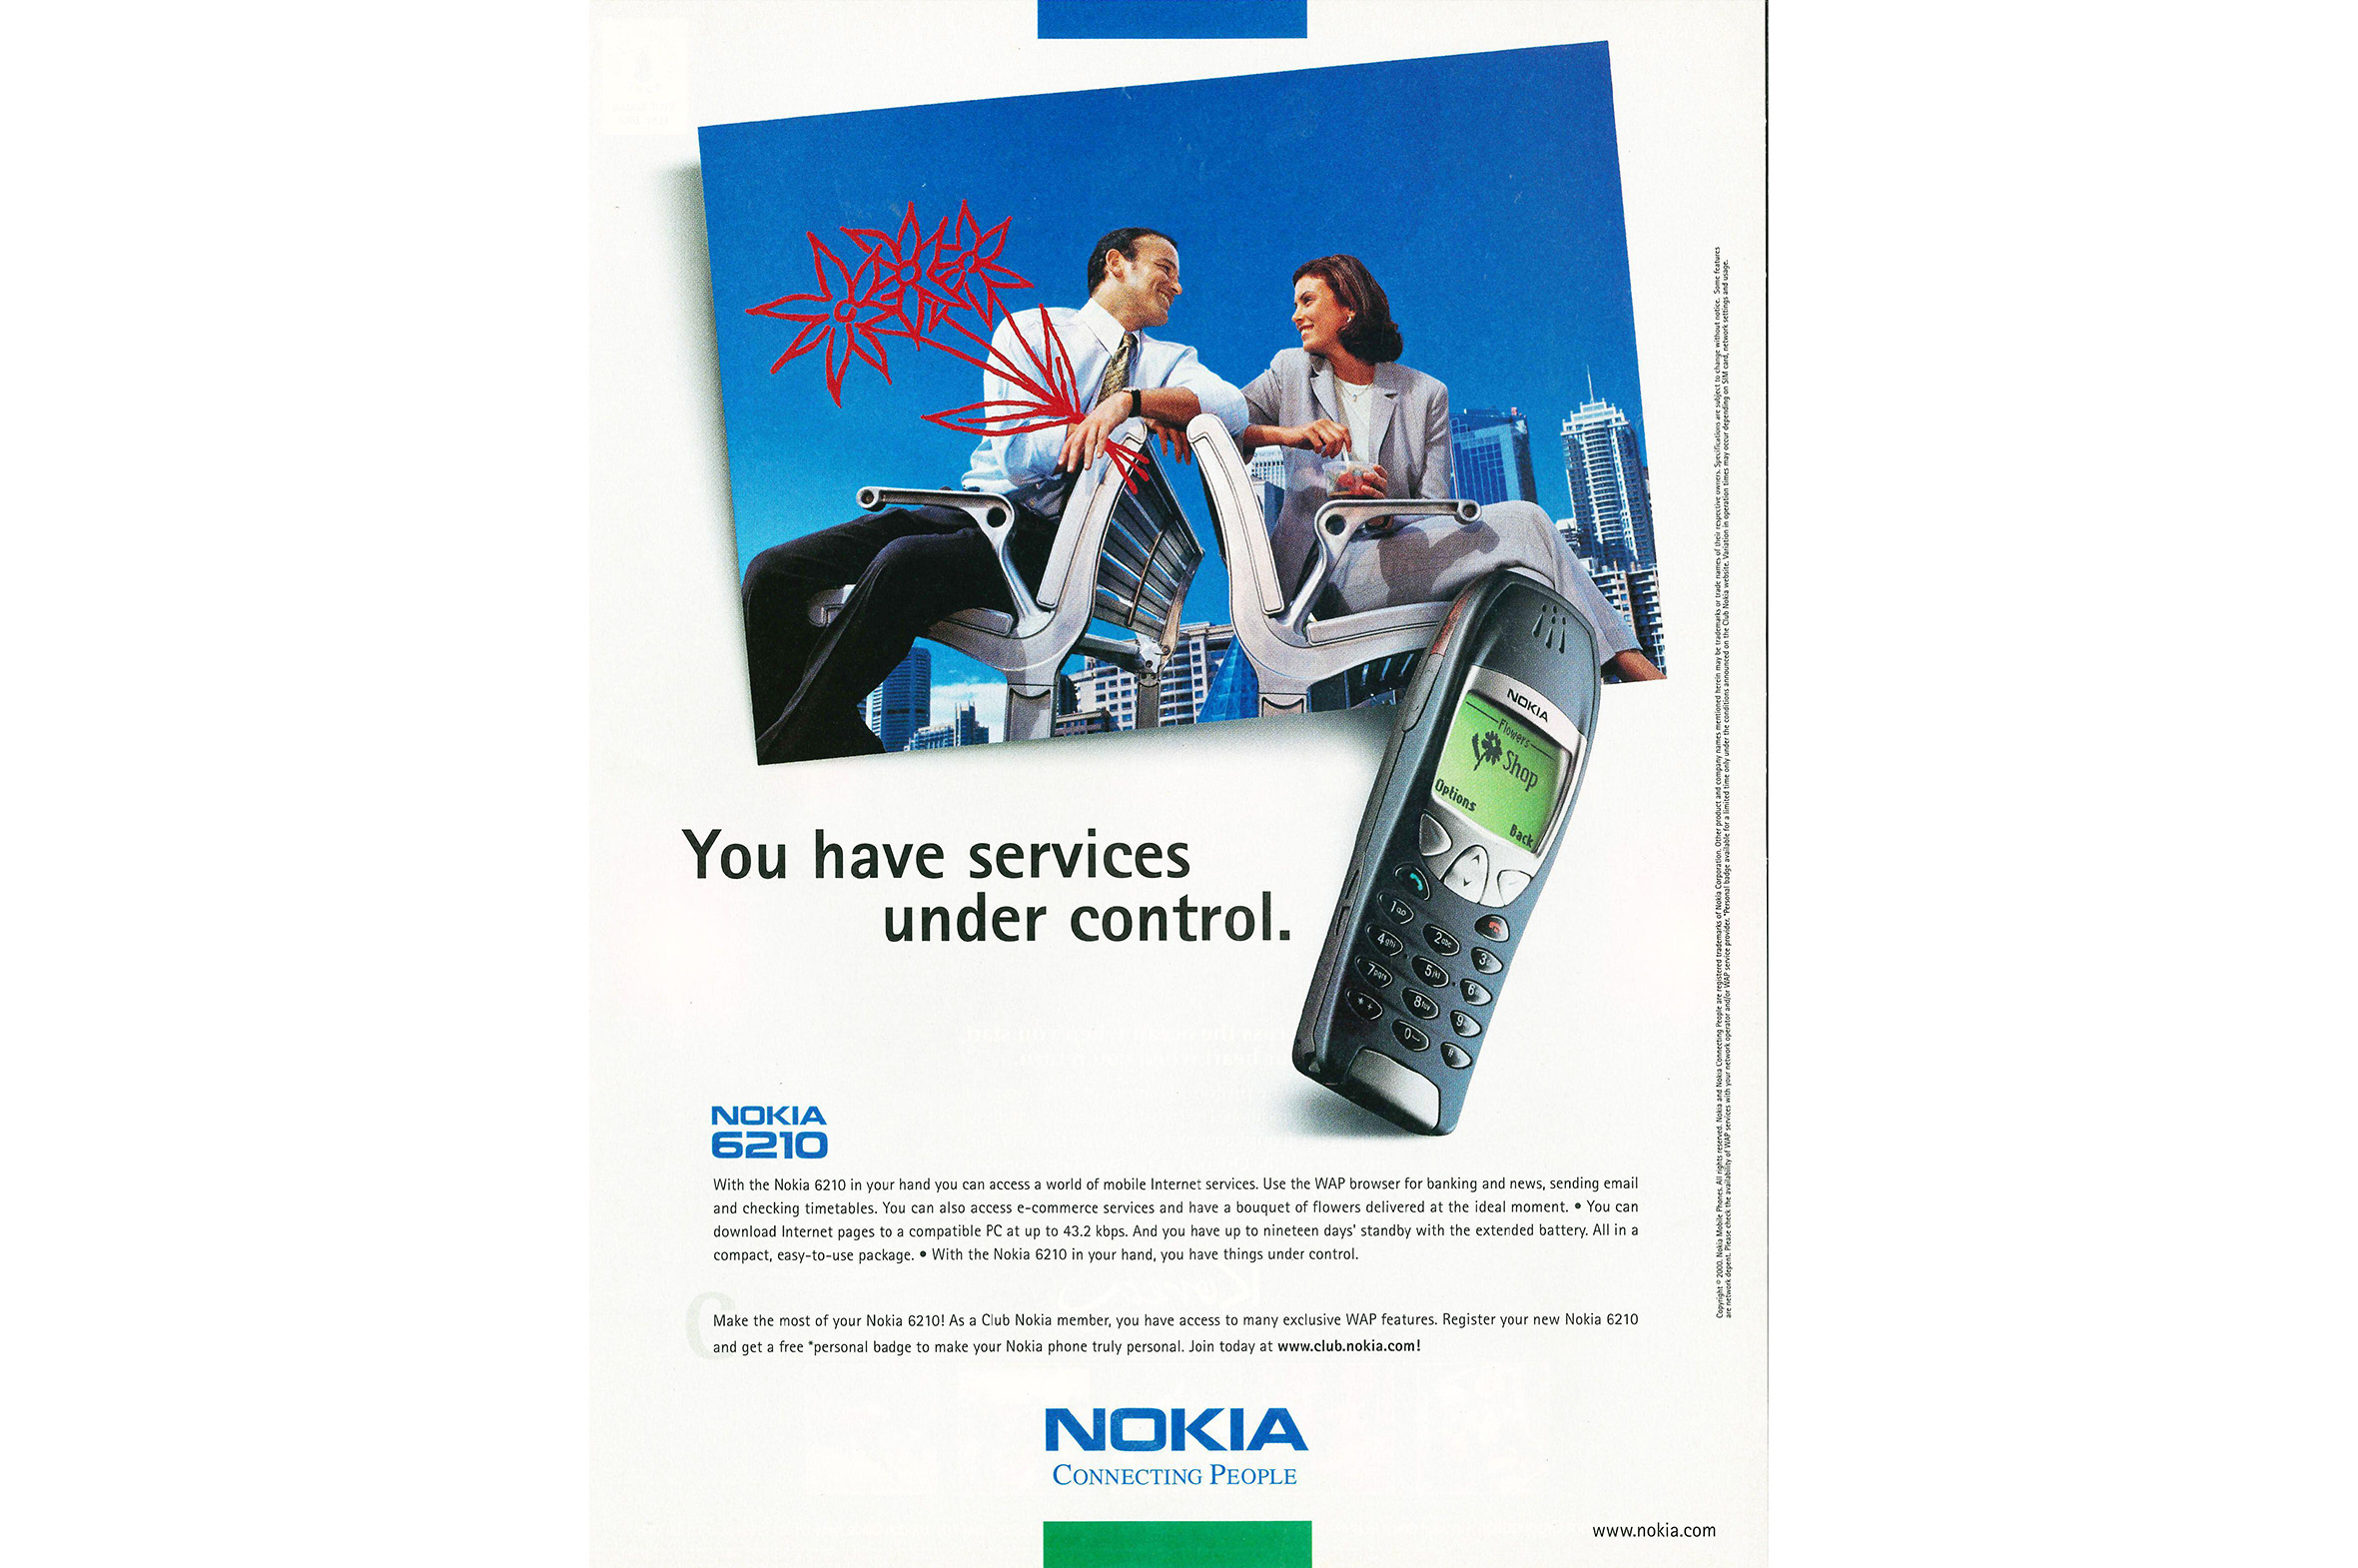 First device certified by GCF, Nokia 6210